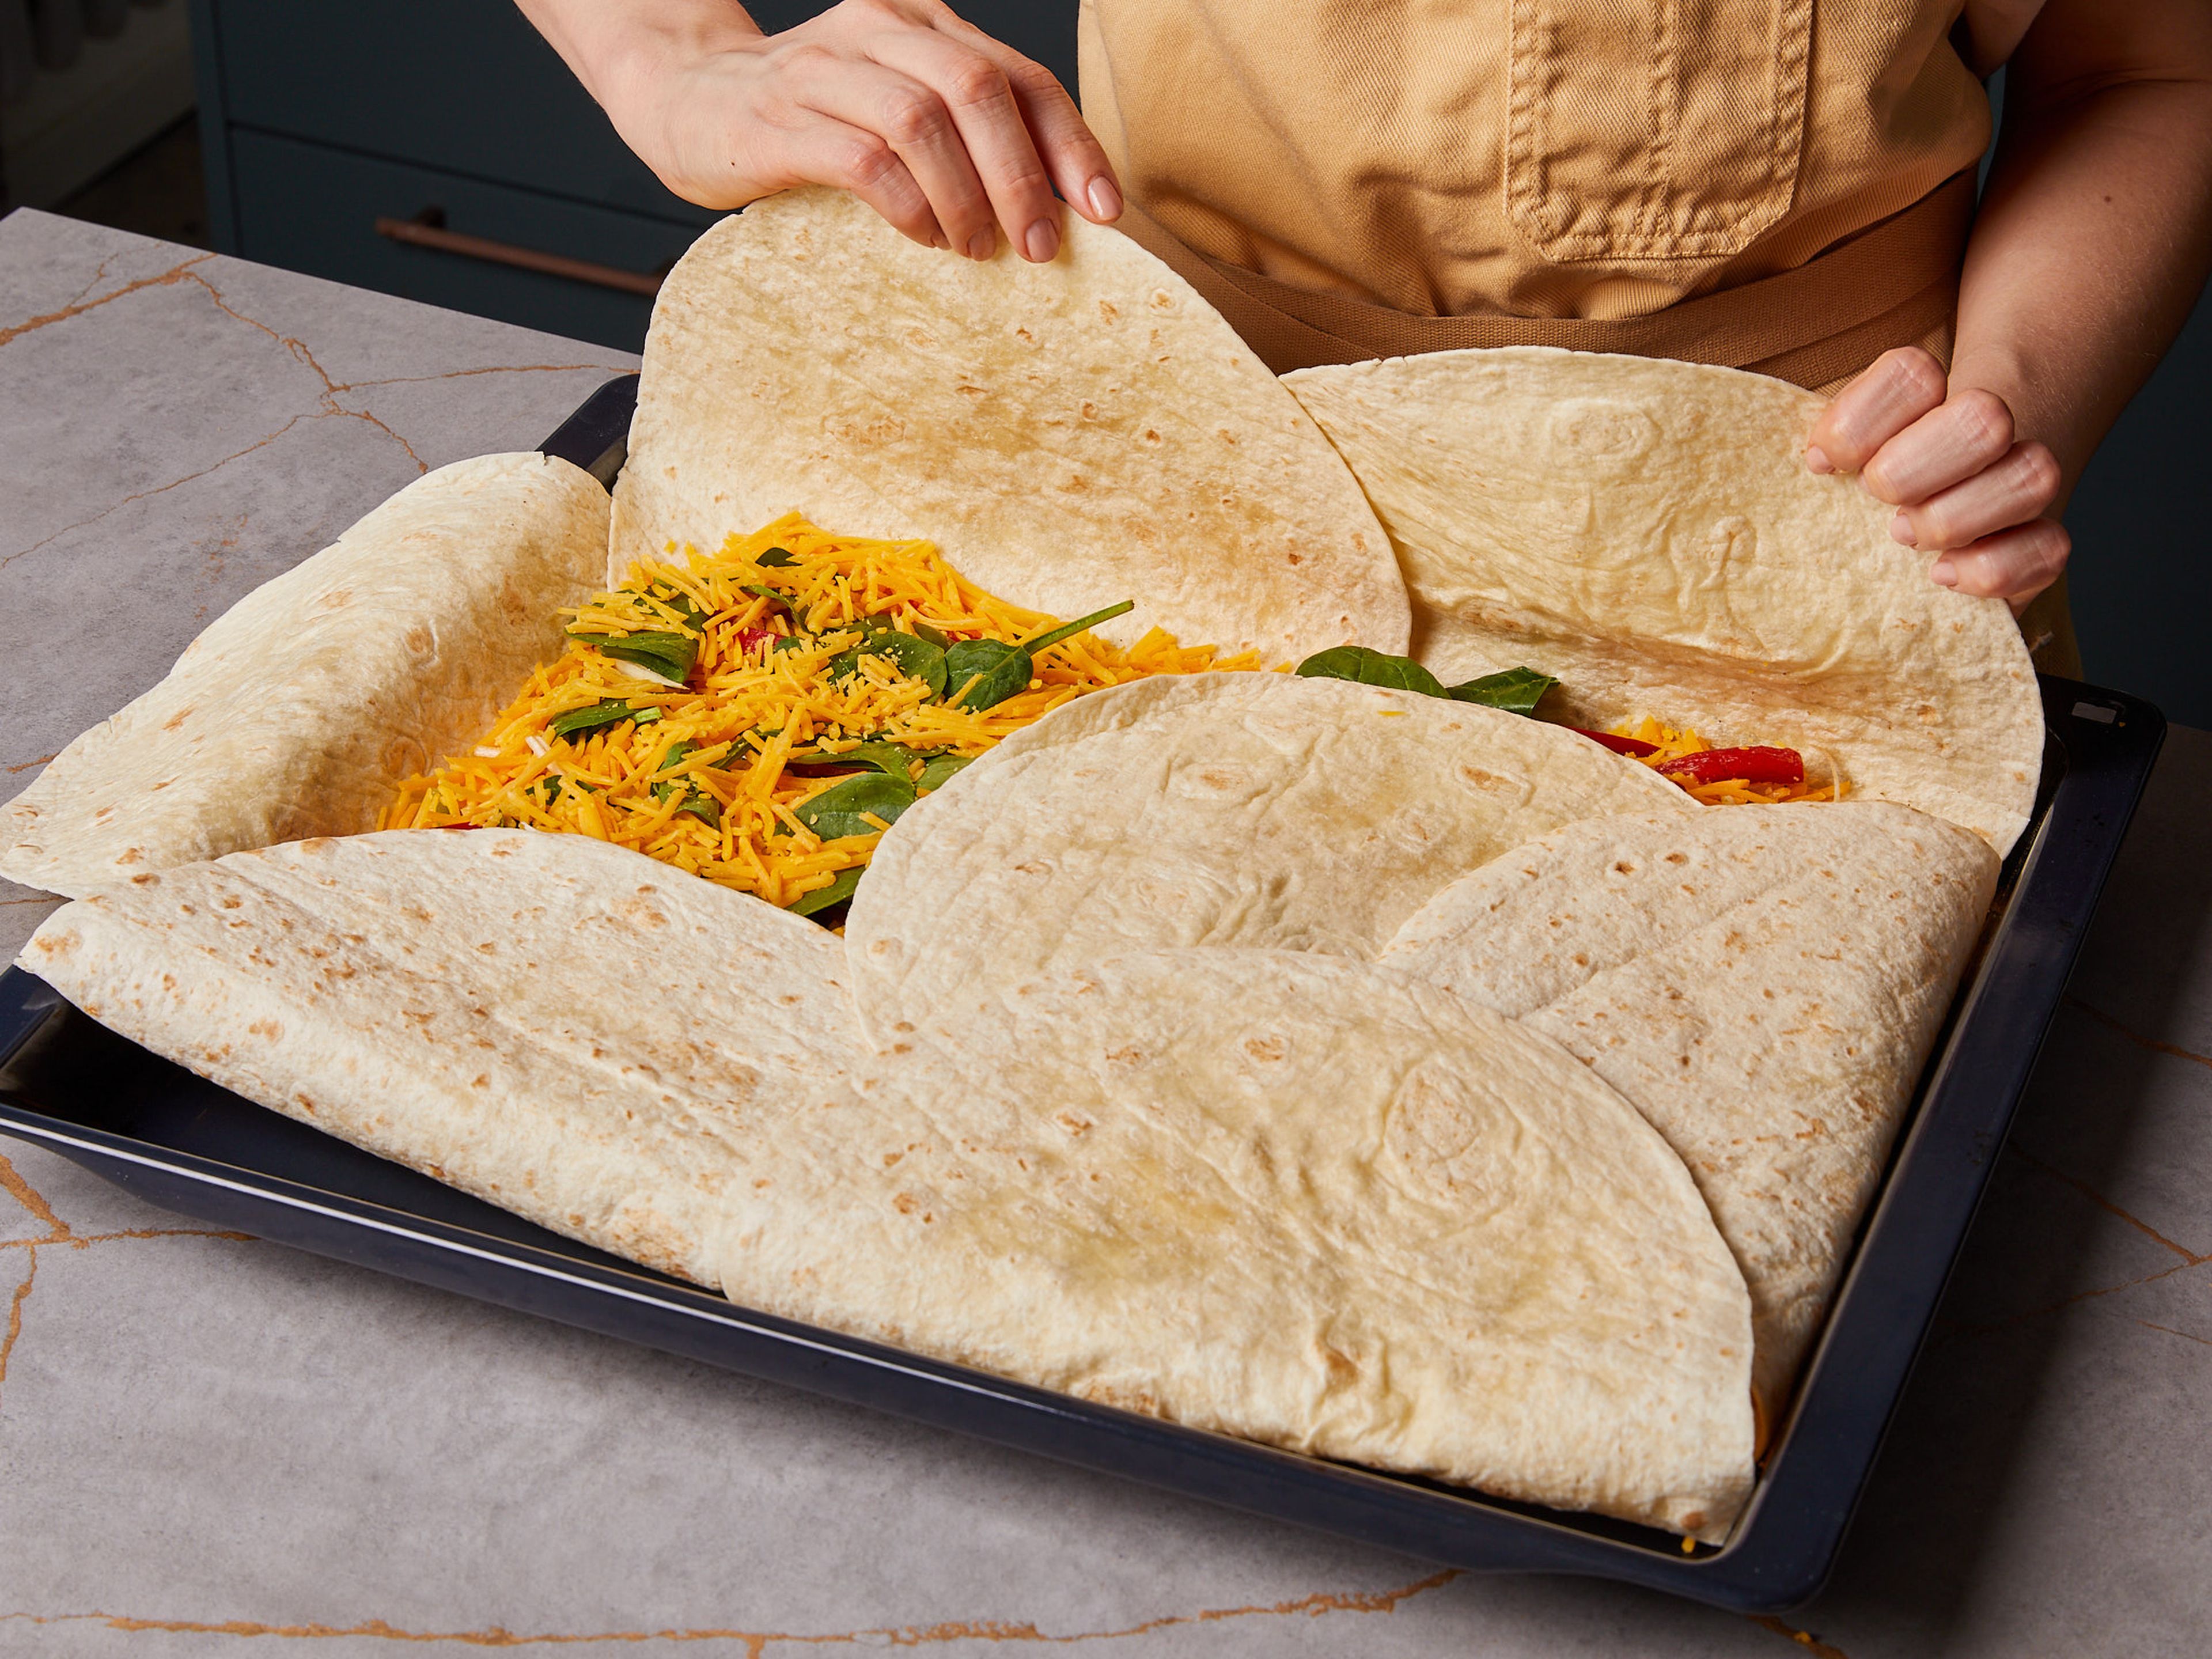 Cover the middle part with the remaining tortillas and fold the tortillas on the sides over the filling to fully cover the top. Place a second baking sheet or two baking forms on top to weigh it down.